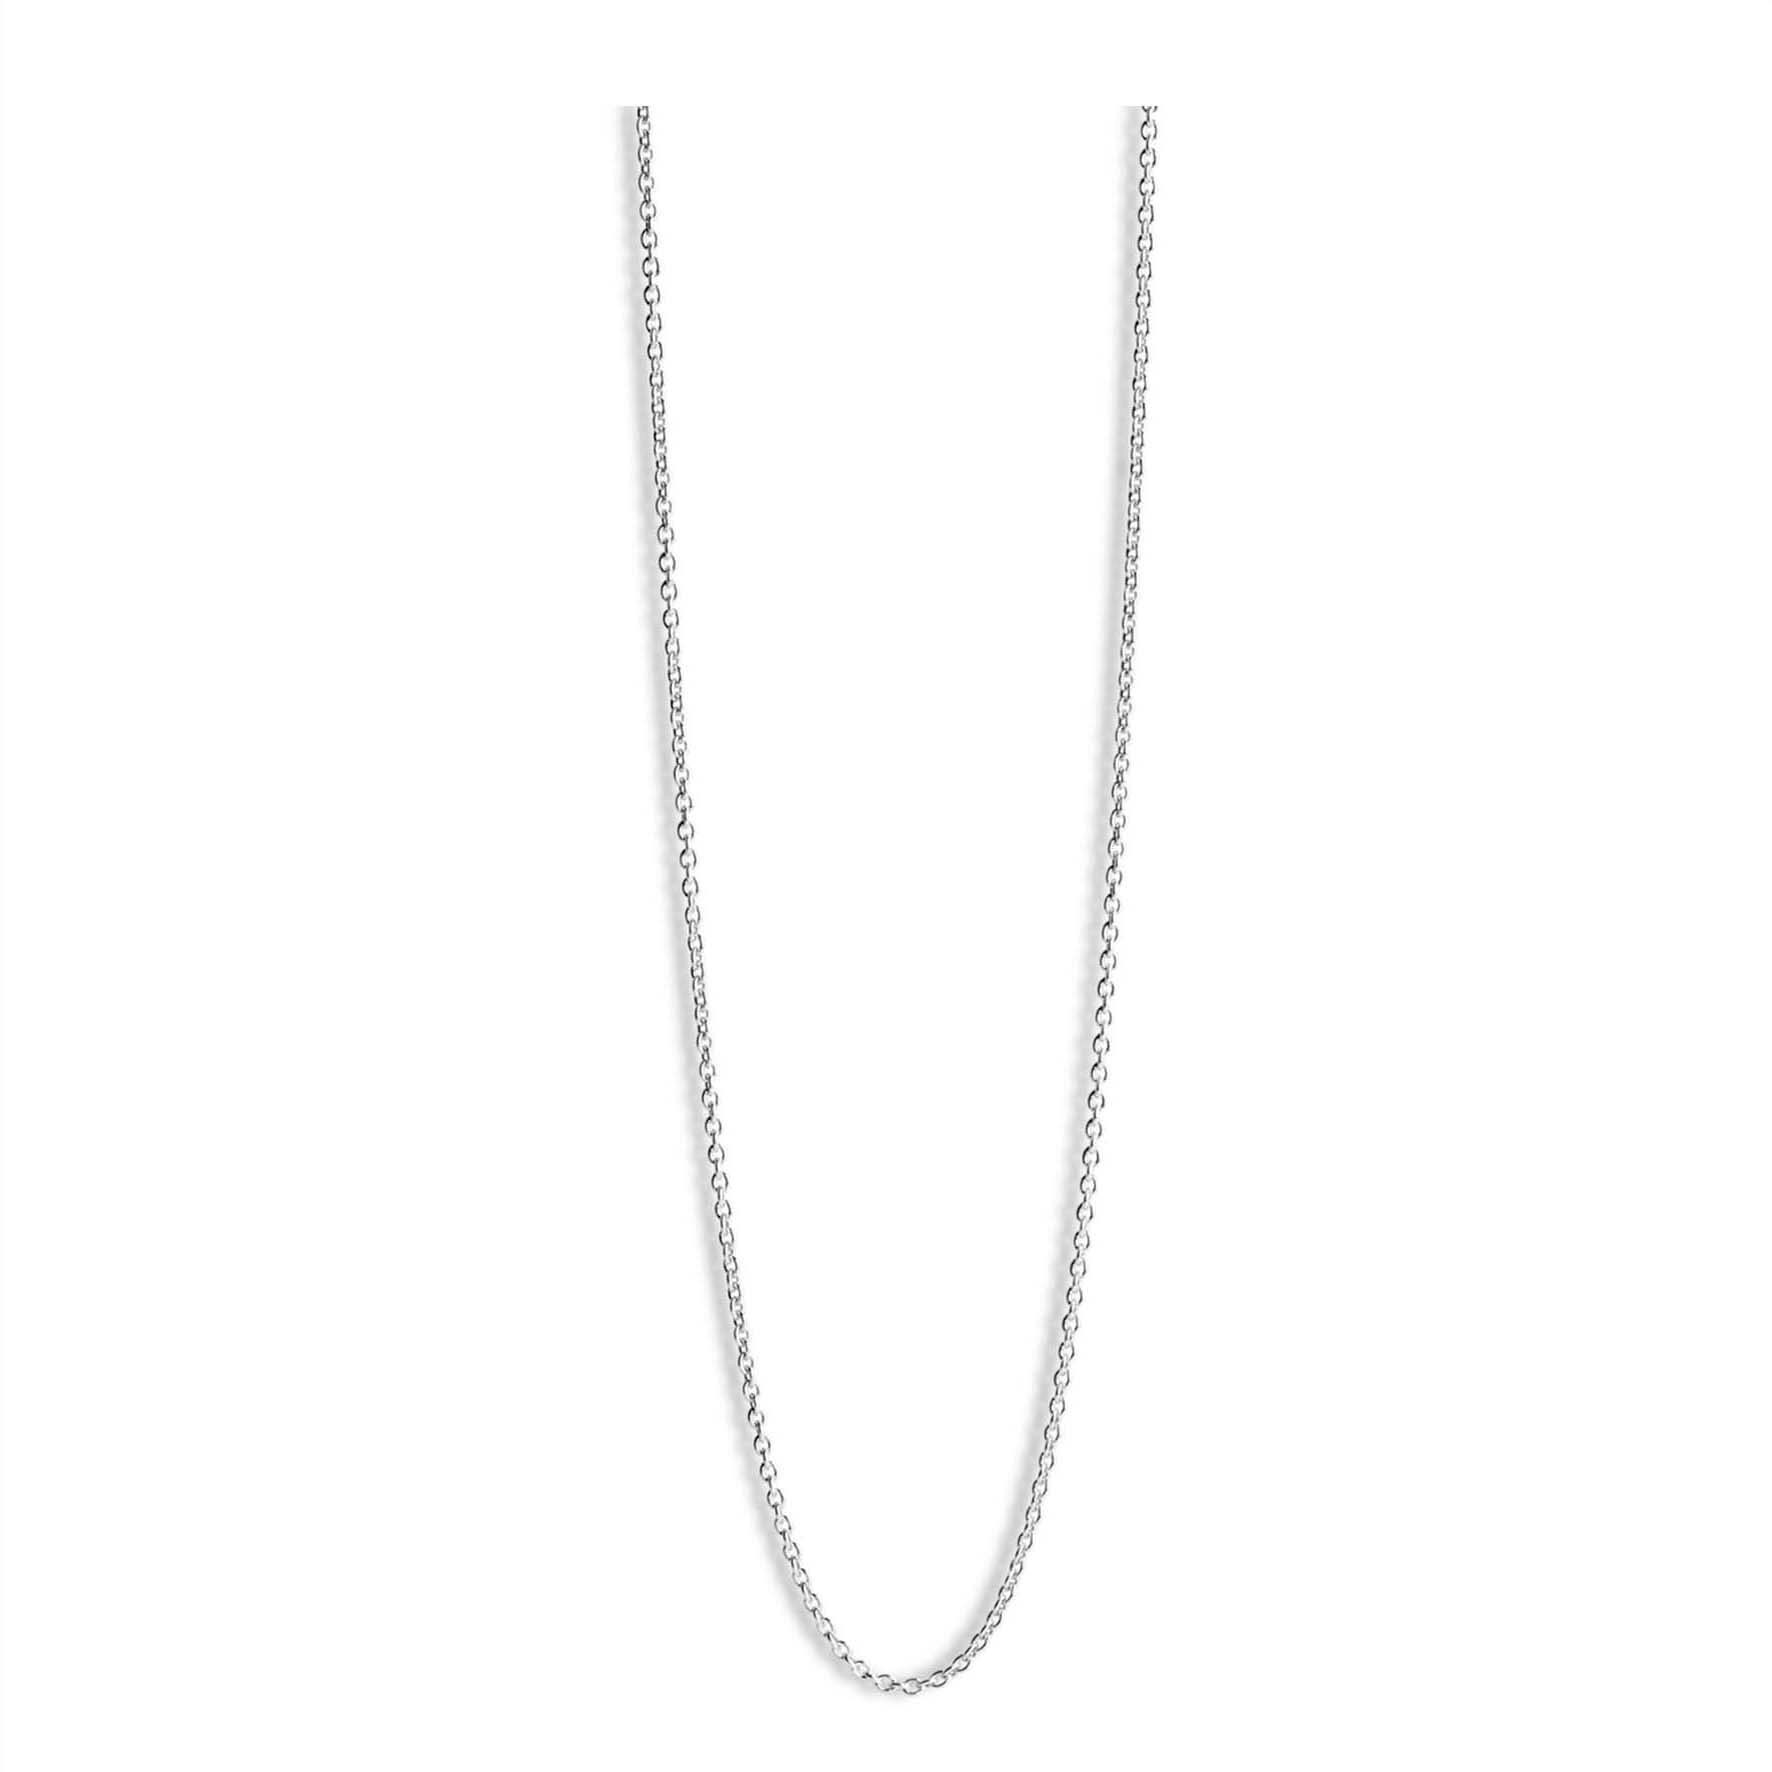 Anchor Chain Necklace from Jane Kønig in Silver Sterling 925